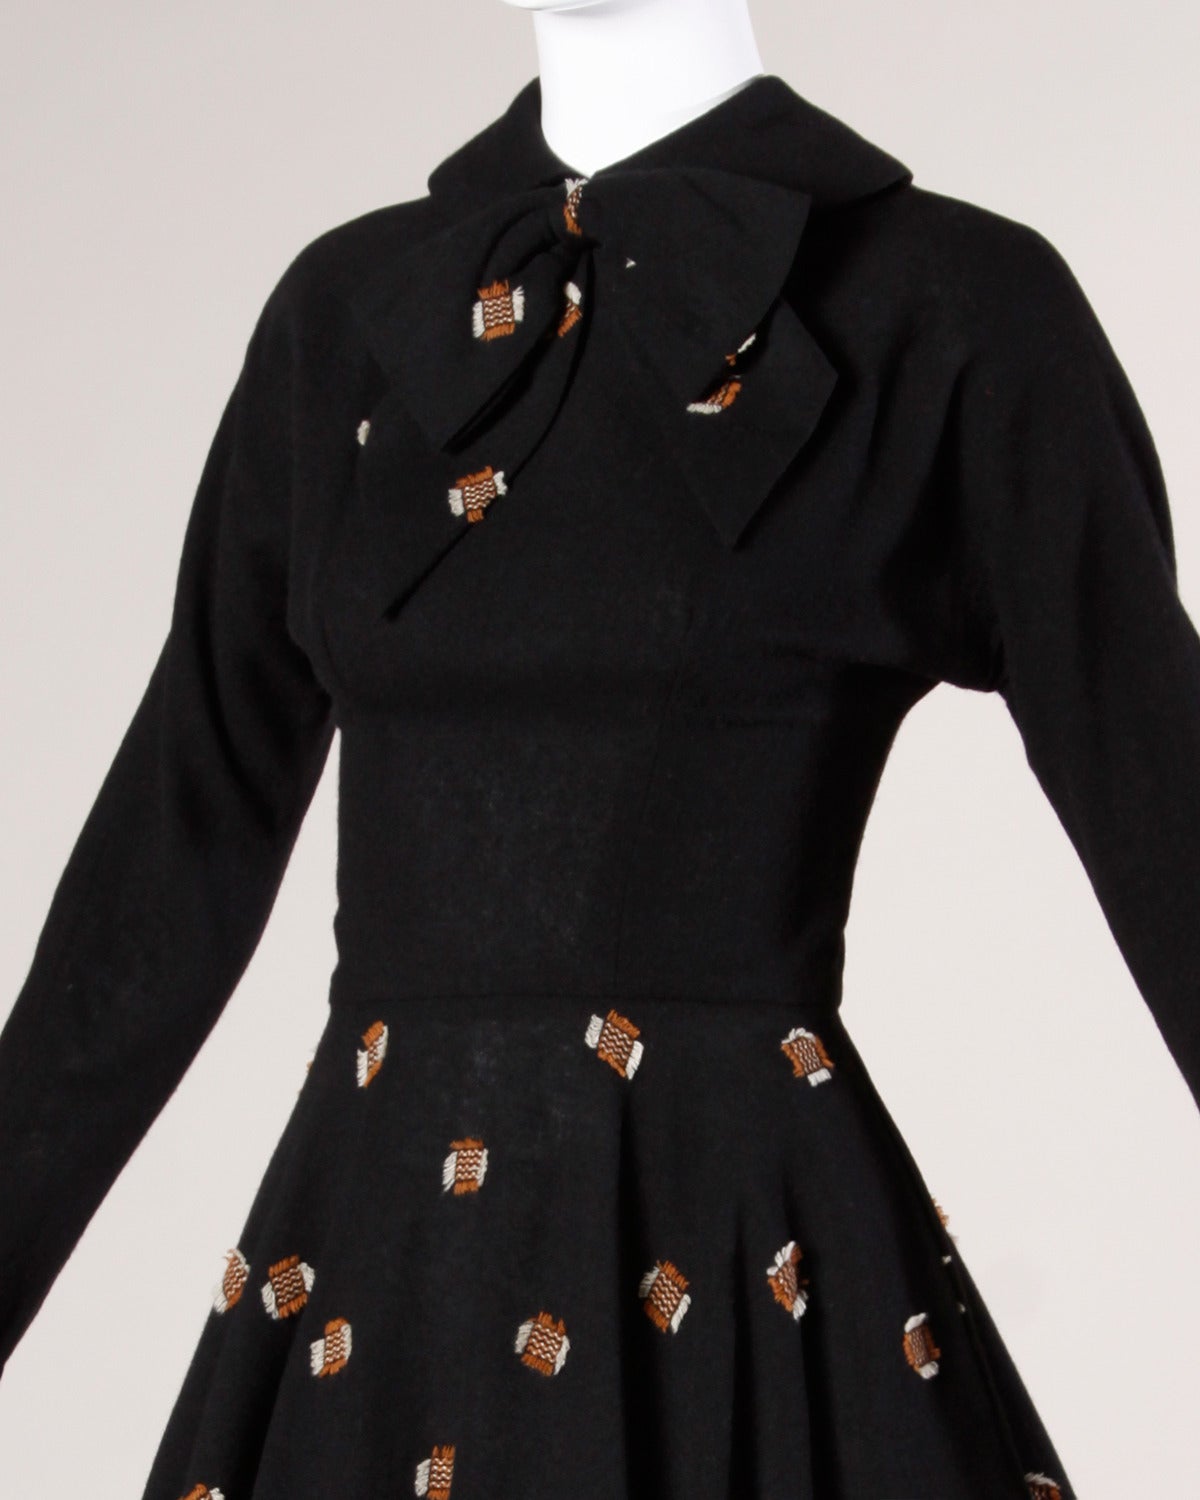 Darling vintage black wool dress by Betty Carol for Mam'selle. Ascot bow tie and Peter Pan collar. 

Details:

Unlined
Back Metal Zip Closure/ Zip Closure At Wrist
Estimated Size: Small
Color: Black/ Chestnut/ Ivory
Fabric: Feels like